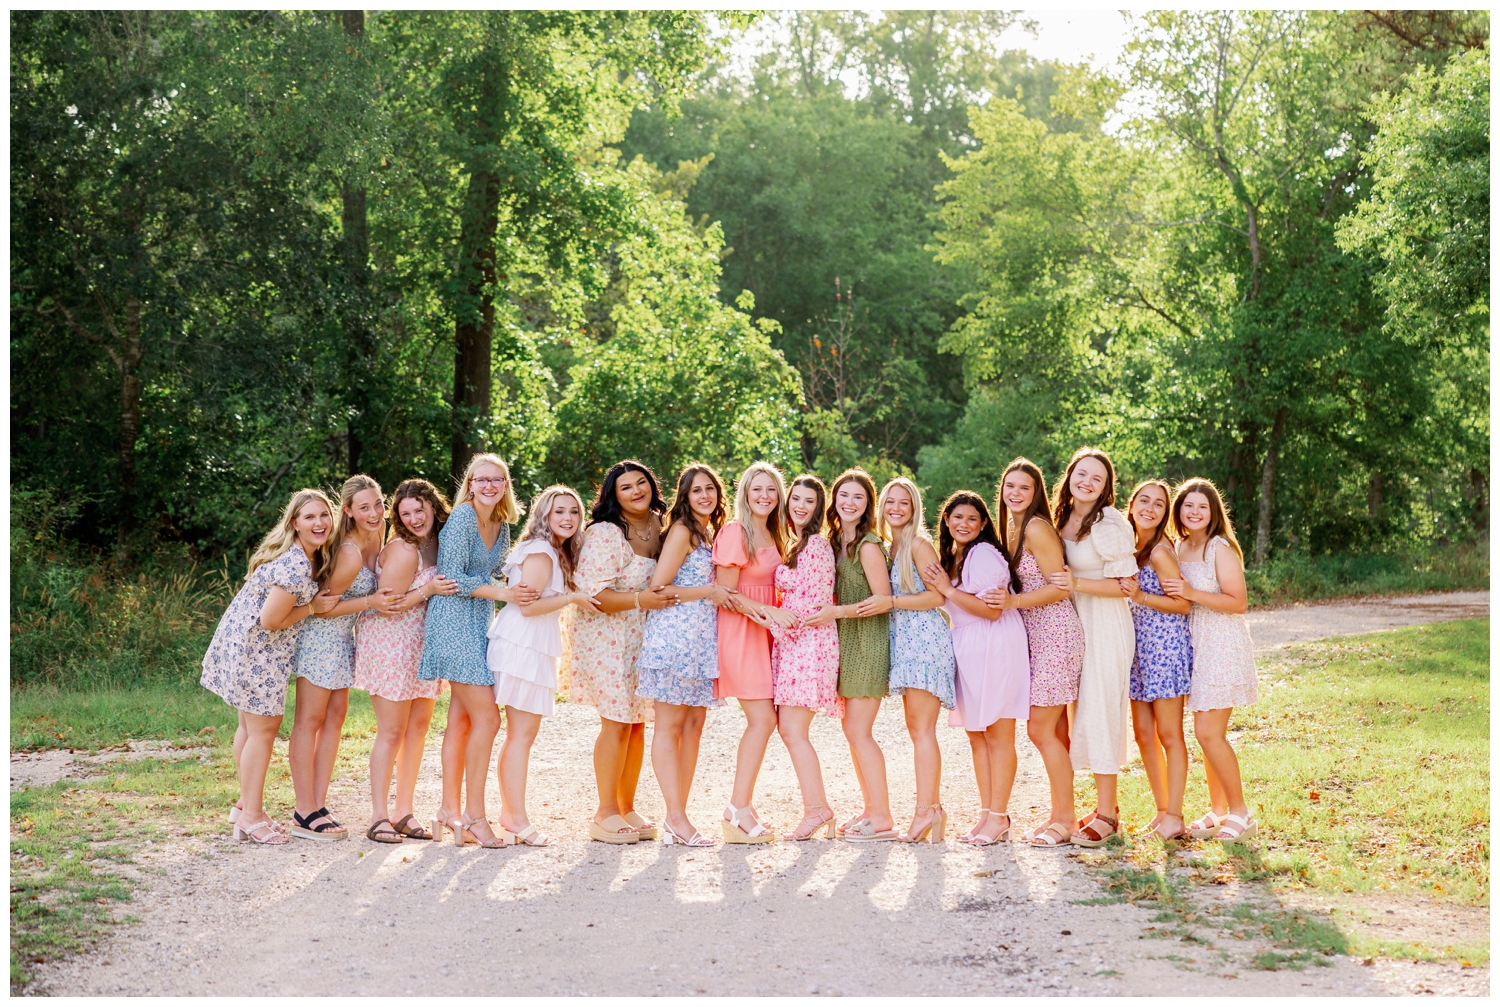 Dawson & Pearland High School Spokesmodel Team for Reed Gallagher Photography